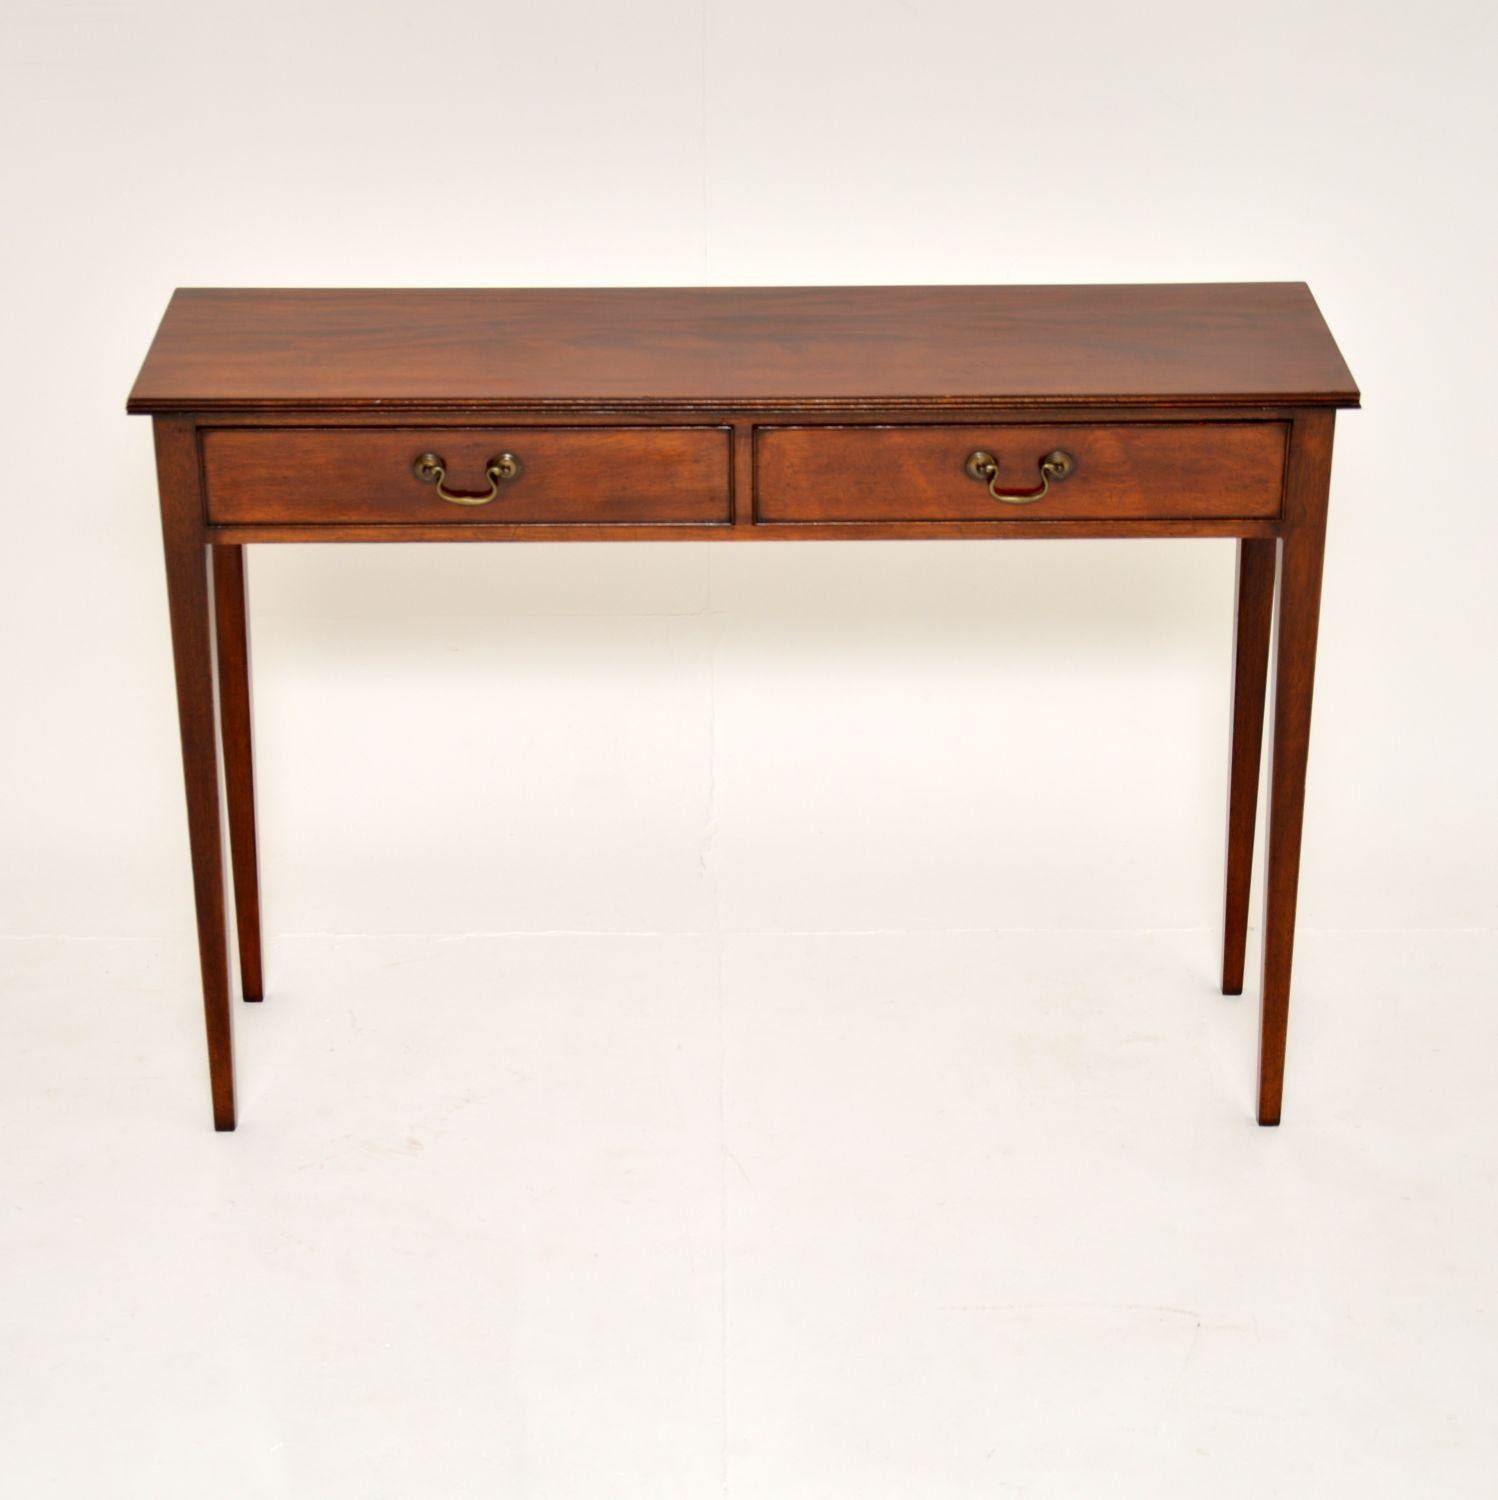 A beautiful antique two drawer console table in the Georgian style. This was made in England & I would date it from around the 1930-50’s period, although the wood looks much older, so this could have been re-constructed from antique timber.

This